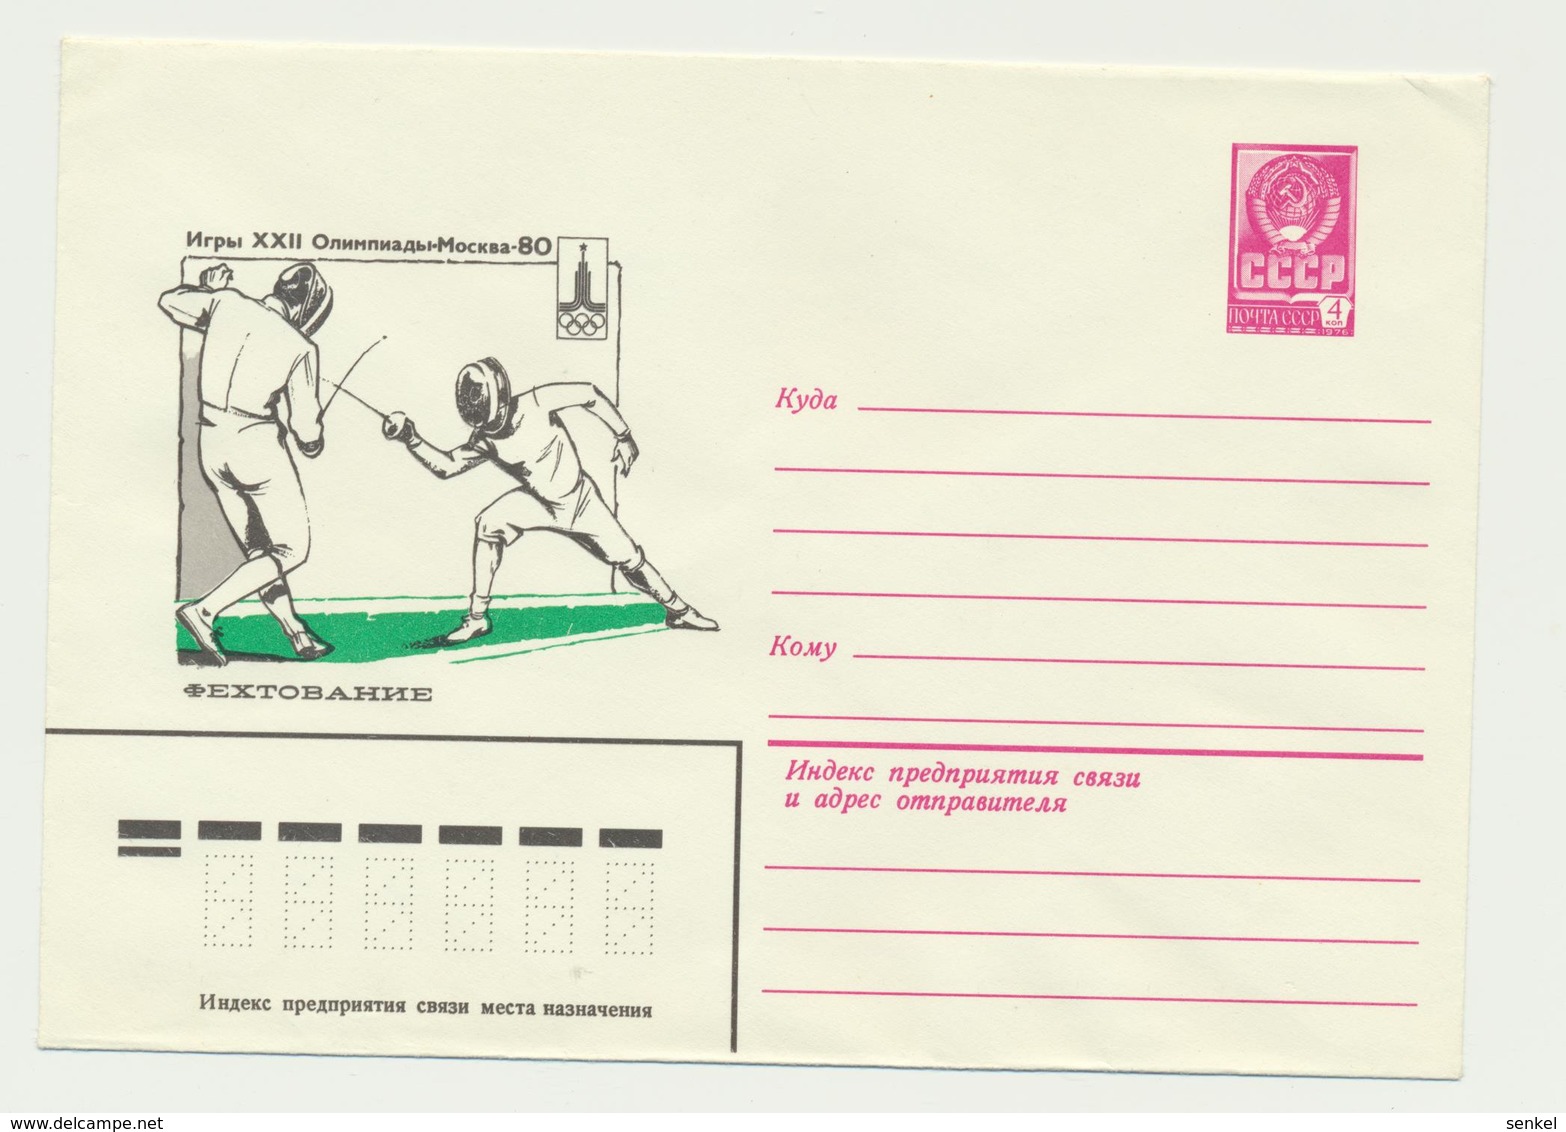 45-725 Russia USSR Postal Stationery Cover 1979 Moscow 1980 Olympics Classic Fencing - 1970-79